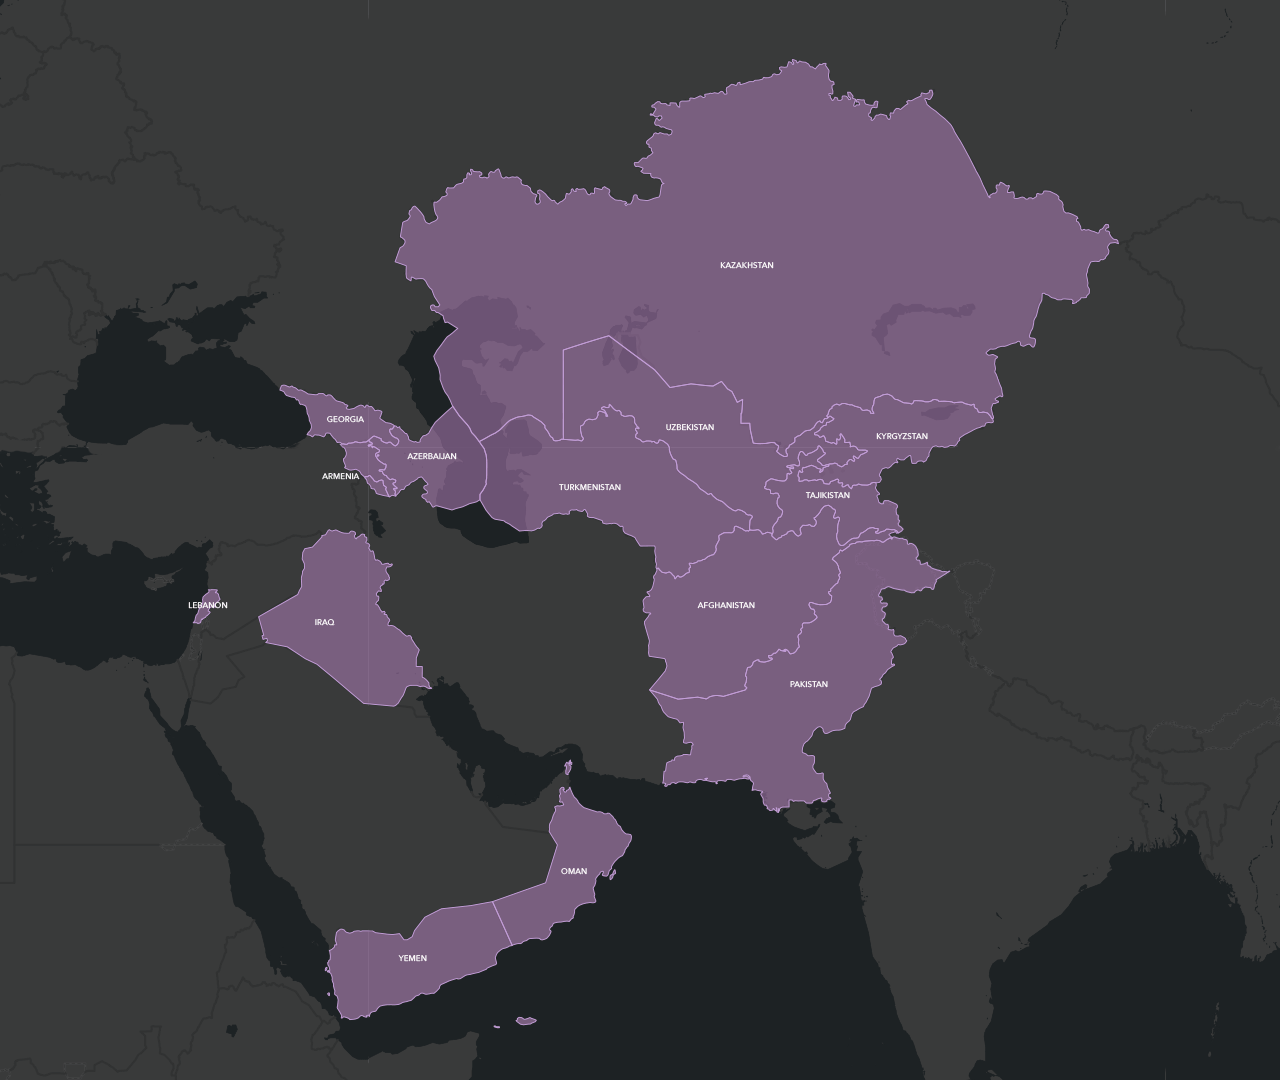 Map of the Middle East and West Asia in dull lavender on a dark gray background with countries outlined and labeled in white